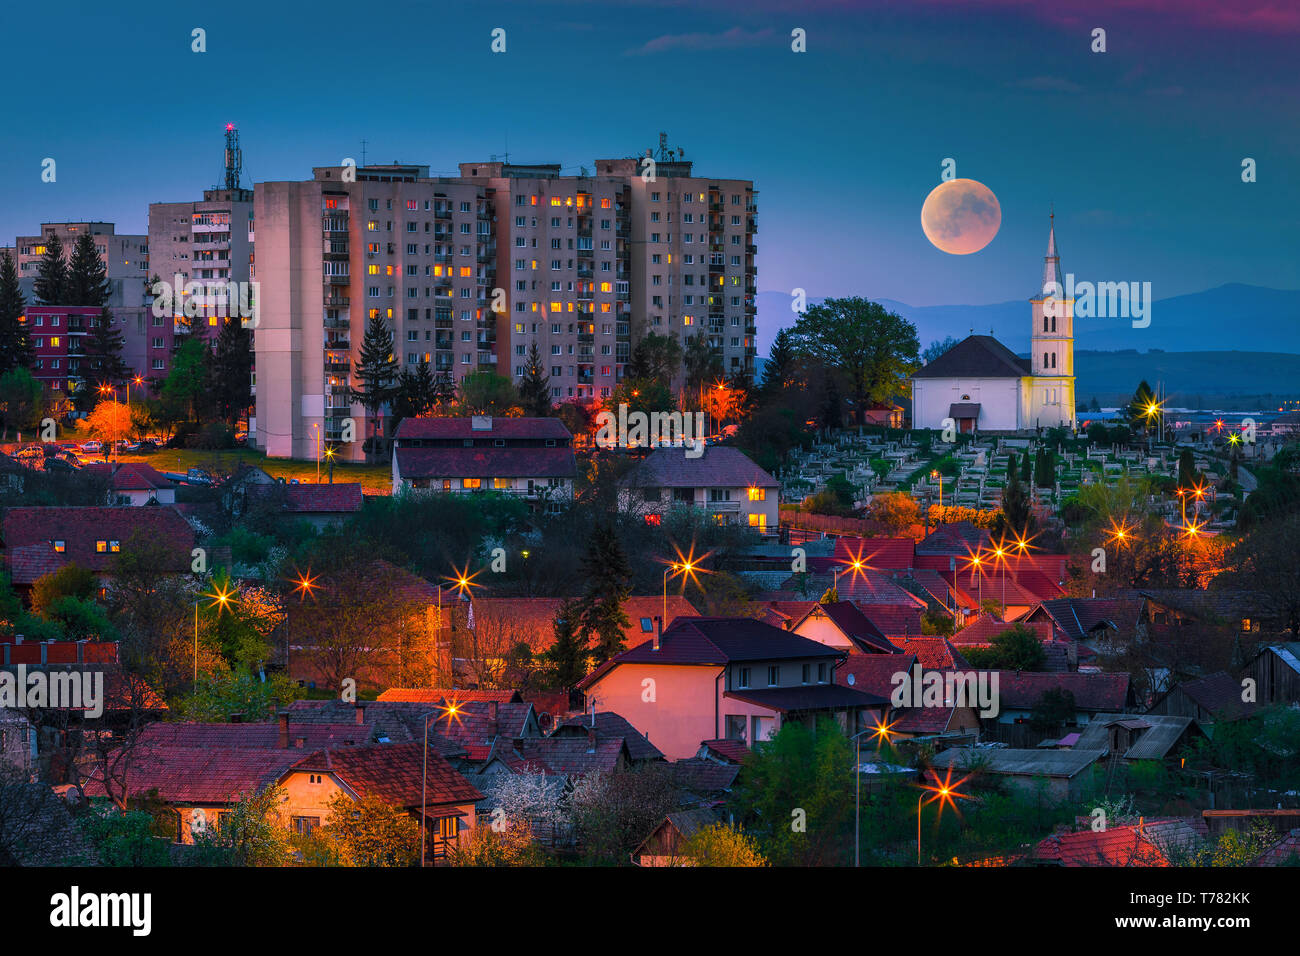 Picturesque evening scene. City landscape at night with full moon, Sfantu Gheorghe, Transylvania, Romania, Europe Stock Photo